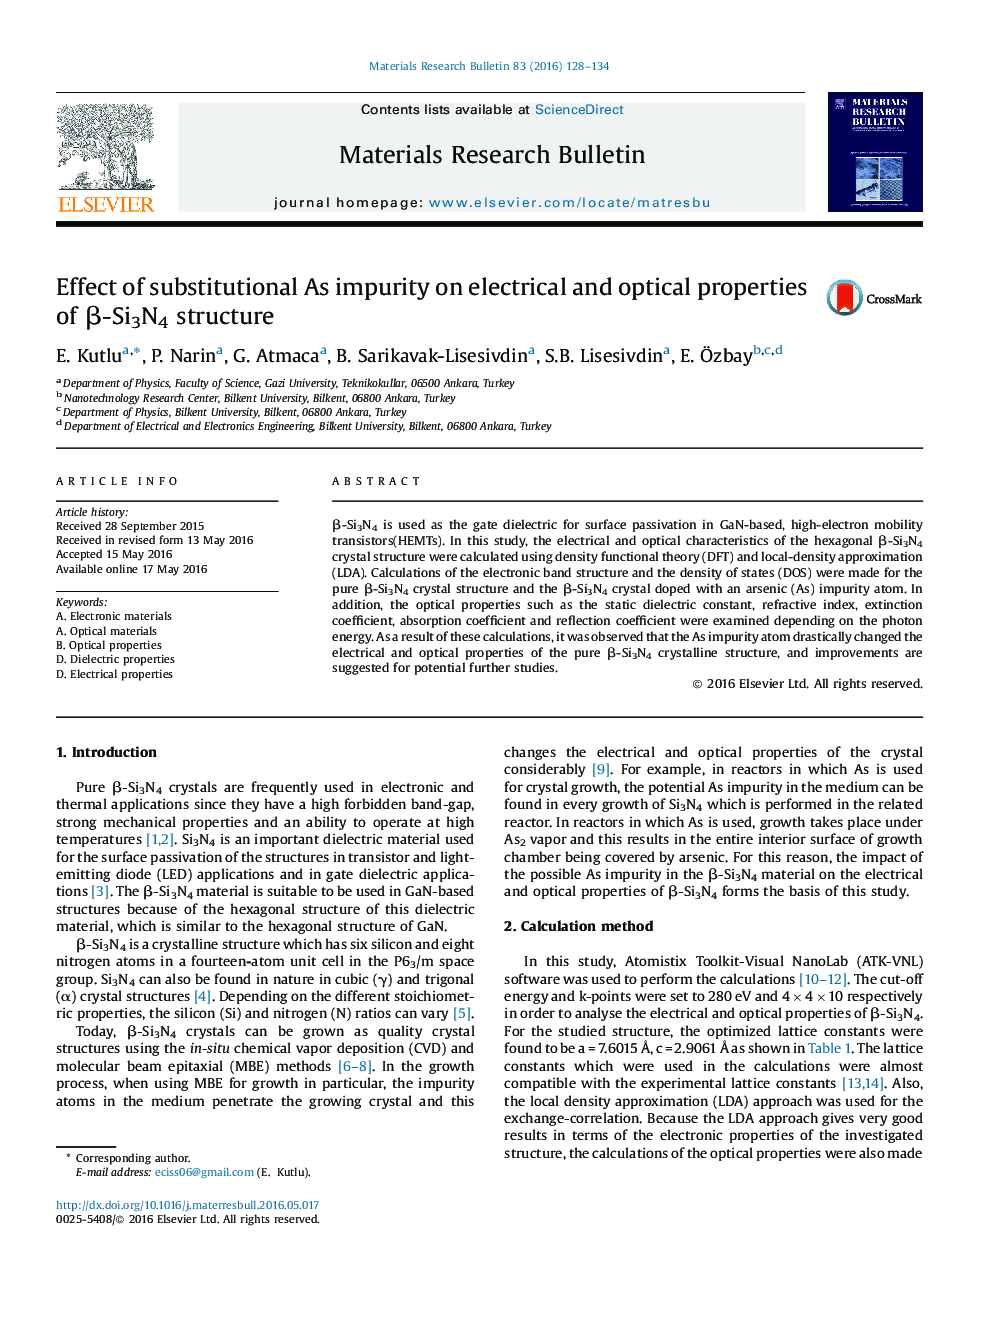 Effect of substitutional As impurity on electrical and optical properties of β-Si3N4 structure